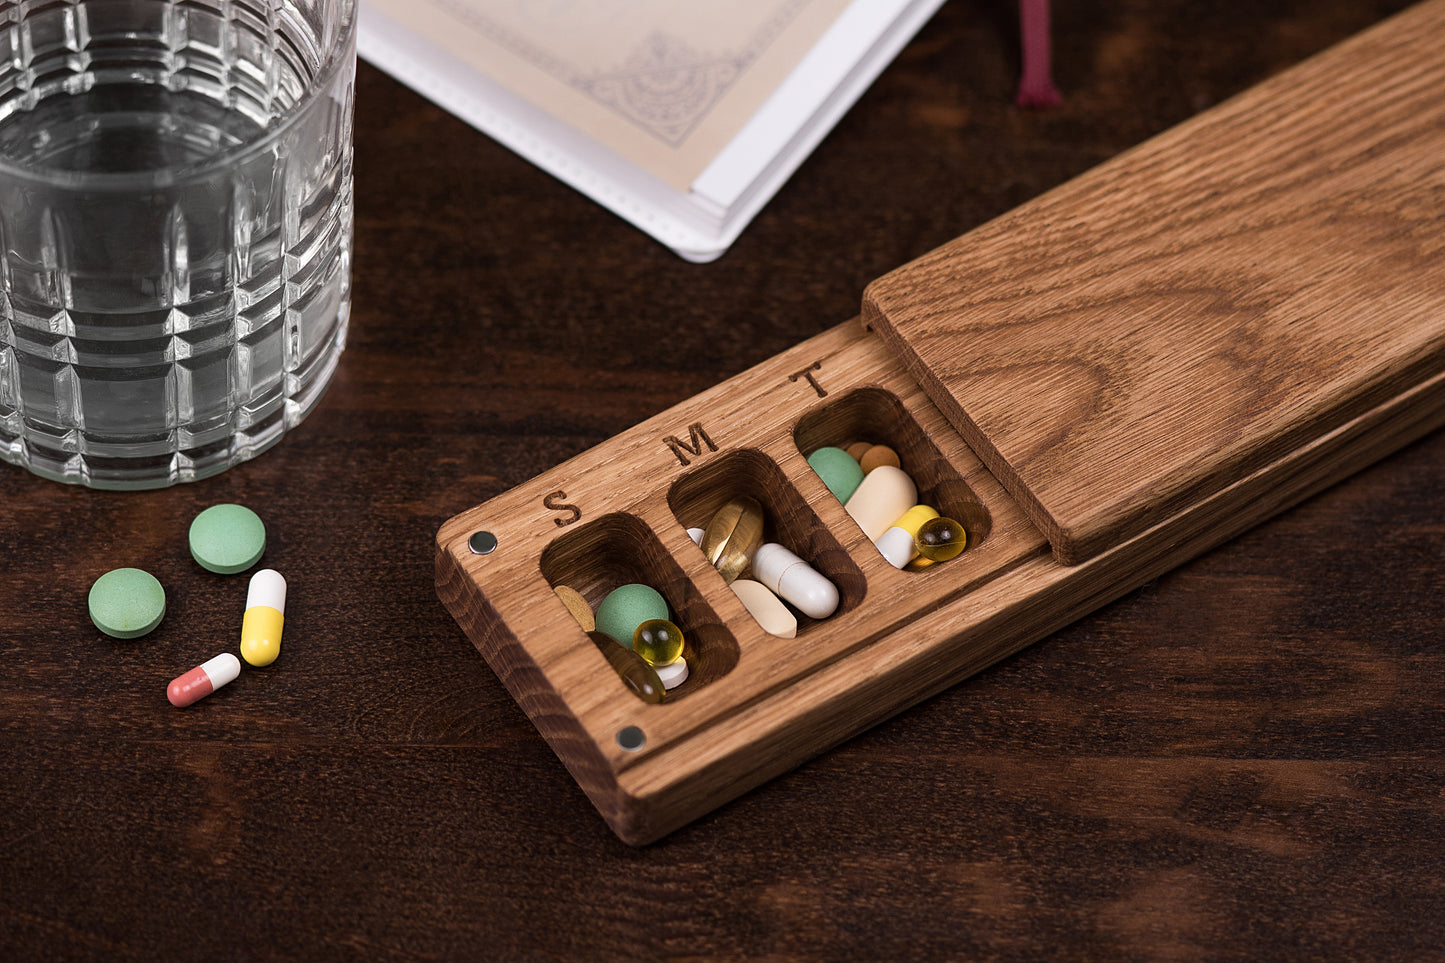 Pill Case Organizer Weekly Pill Box Nature Ornament Natural type 10 - JTNLAB